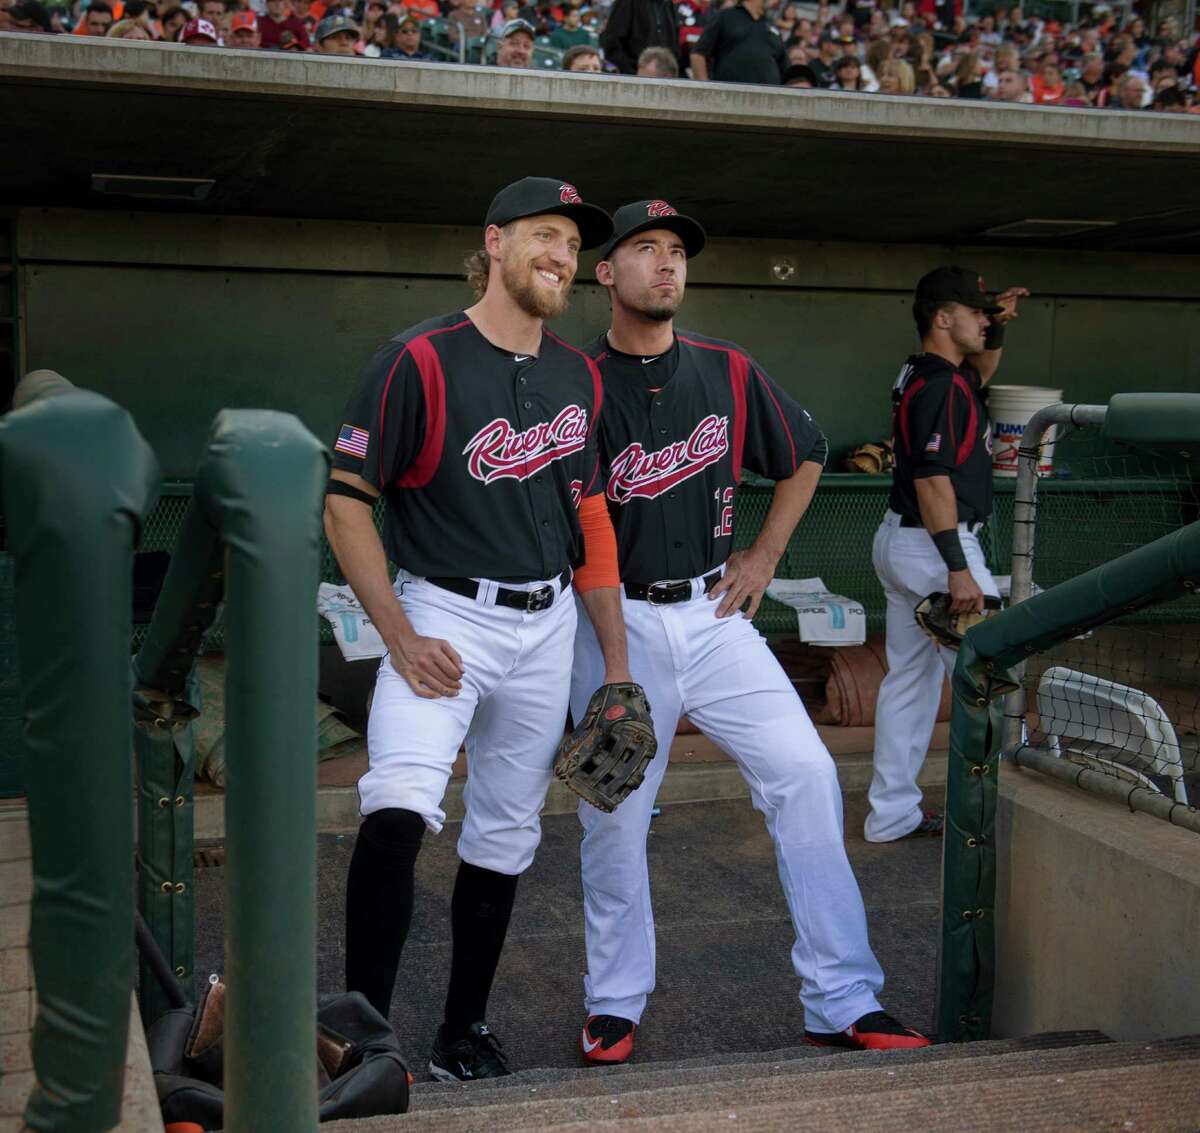 San Francisco Giants Hunter Pence stands with Travis Ishikawa before taking the field in the top of the first inning in his first rehab game for the Sacramento River Cats on Friday, May 8, 2015, at Raley Field in West Sacramento, California